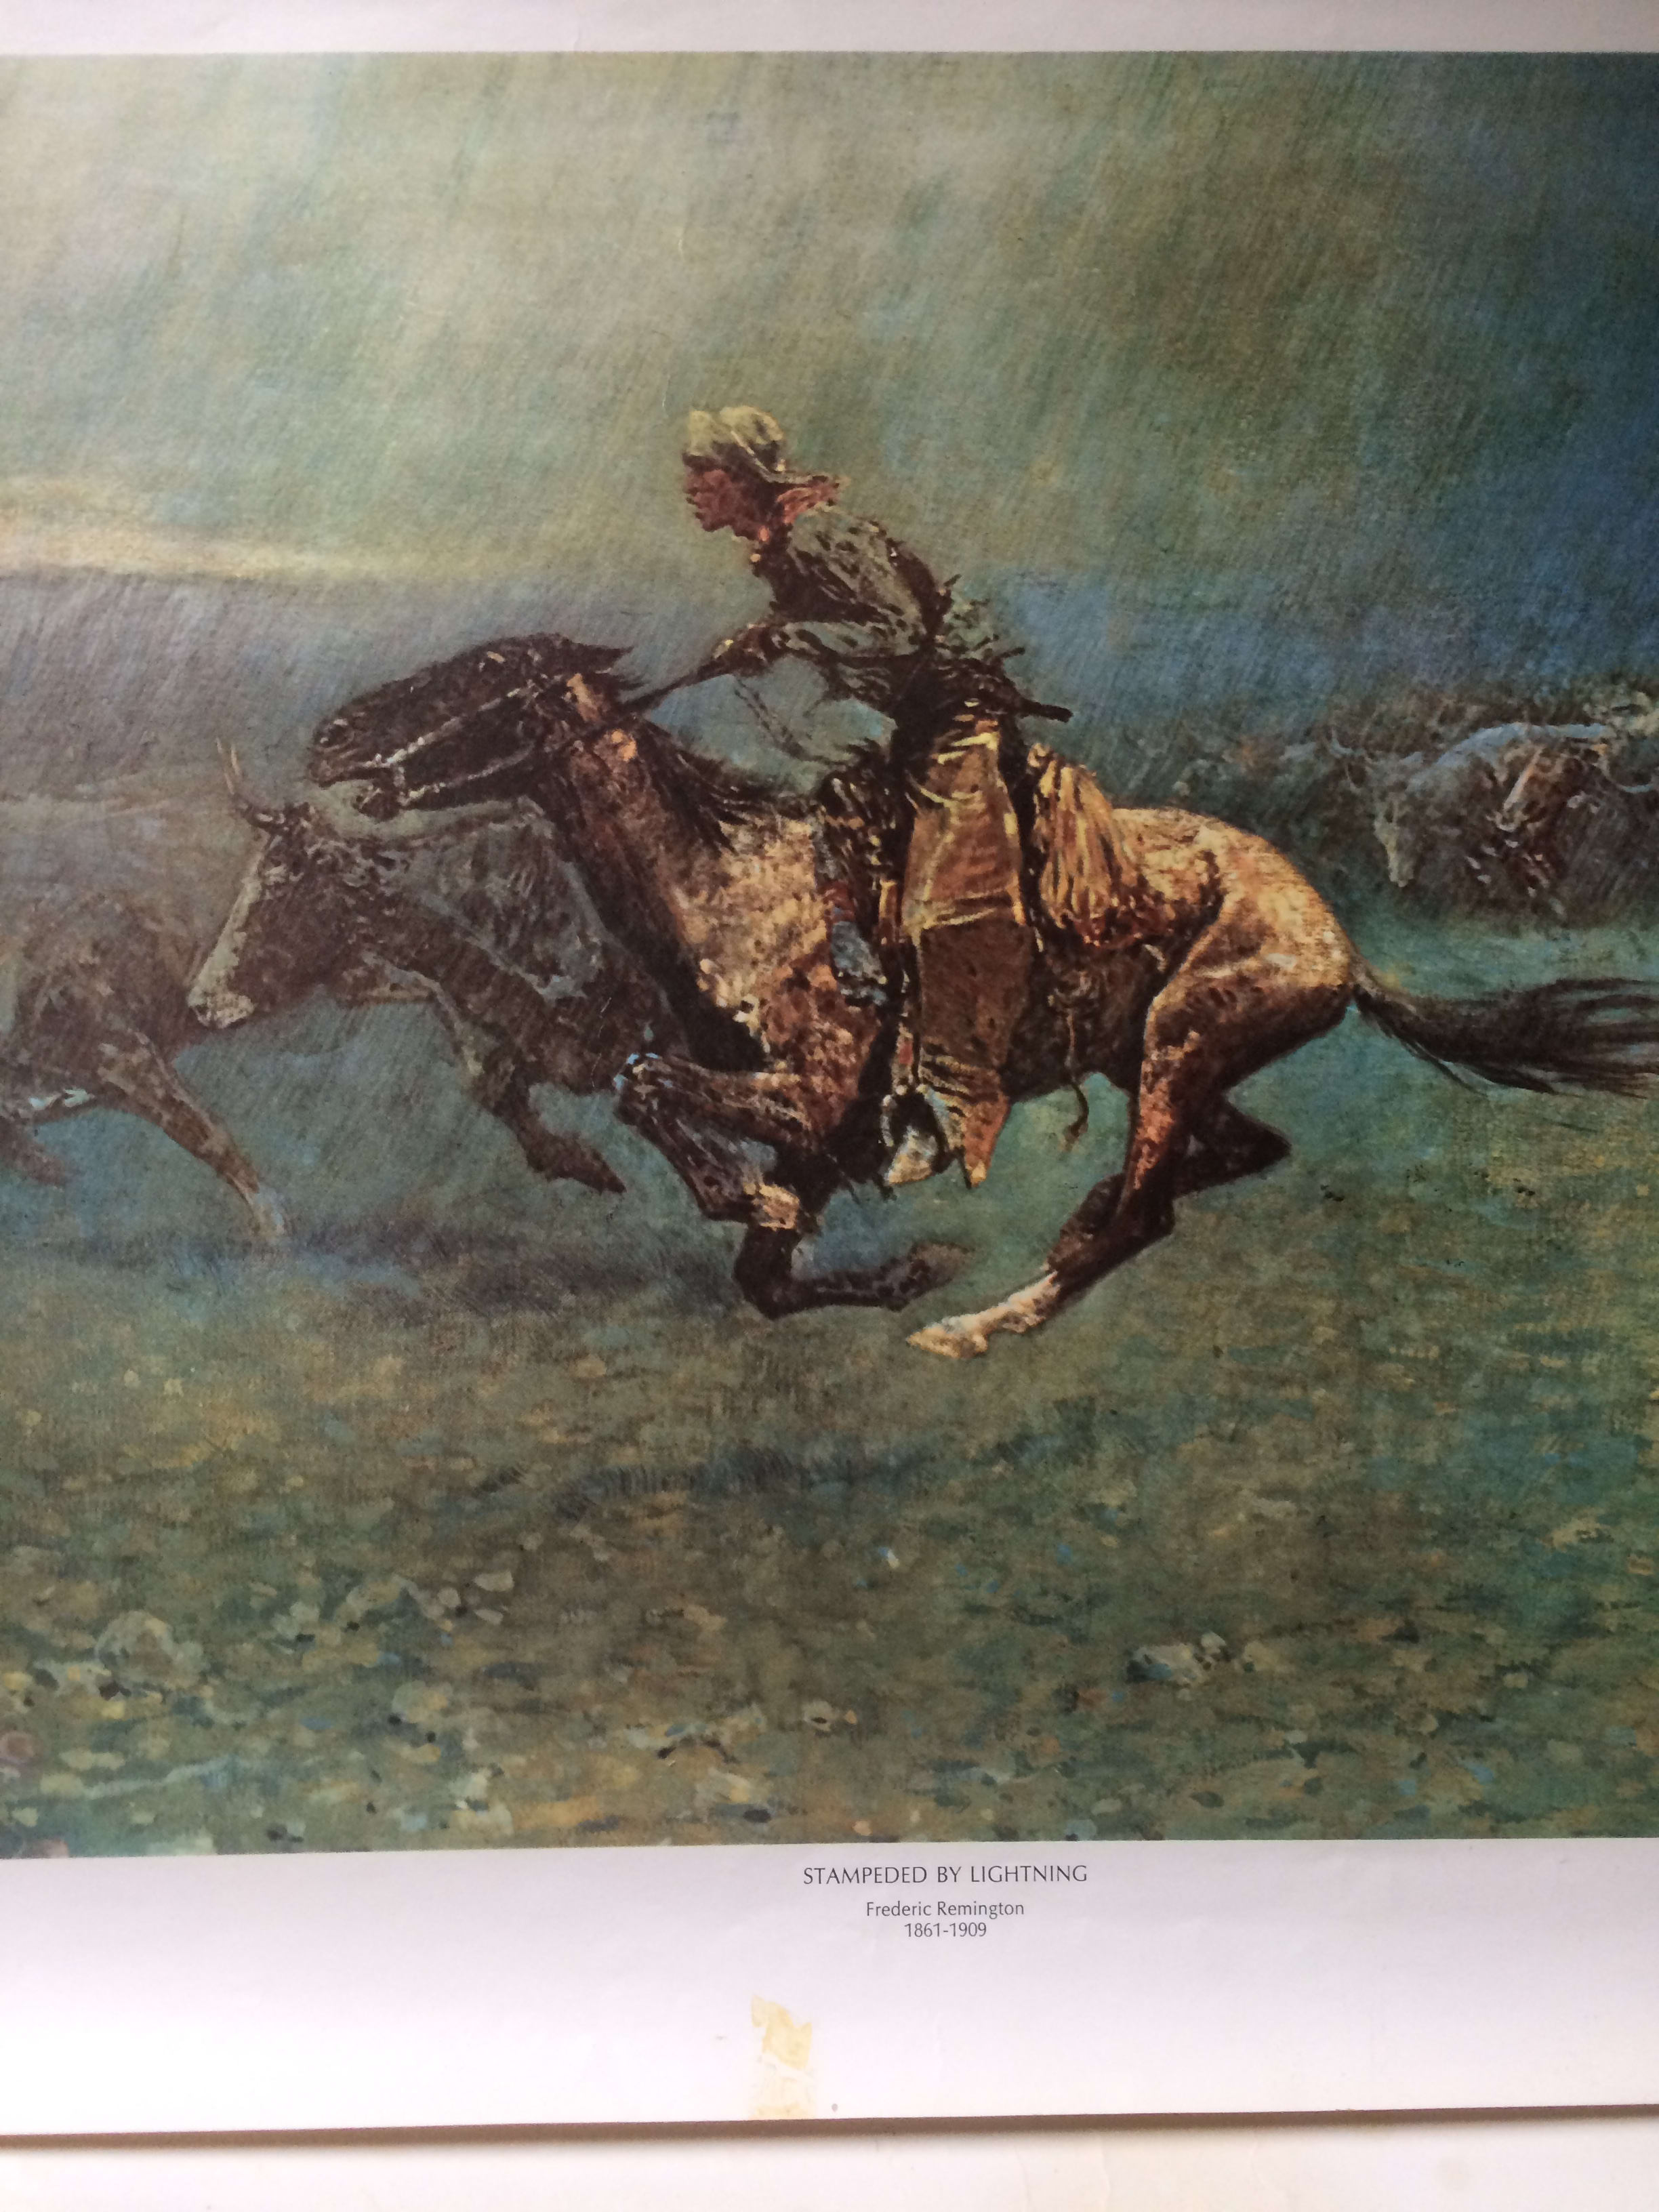 Frederic Remington "Stampeded By Lightning" 